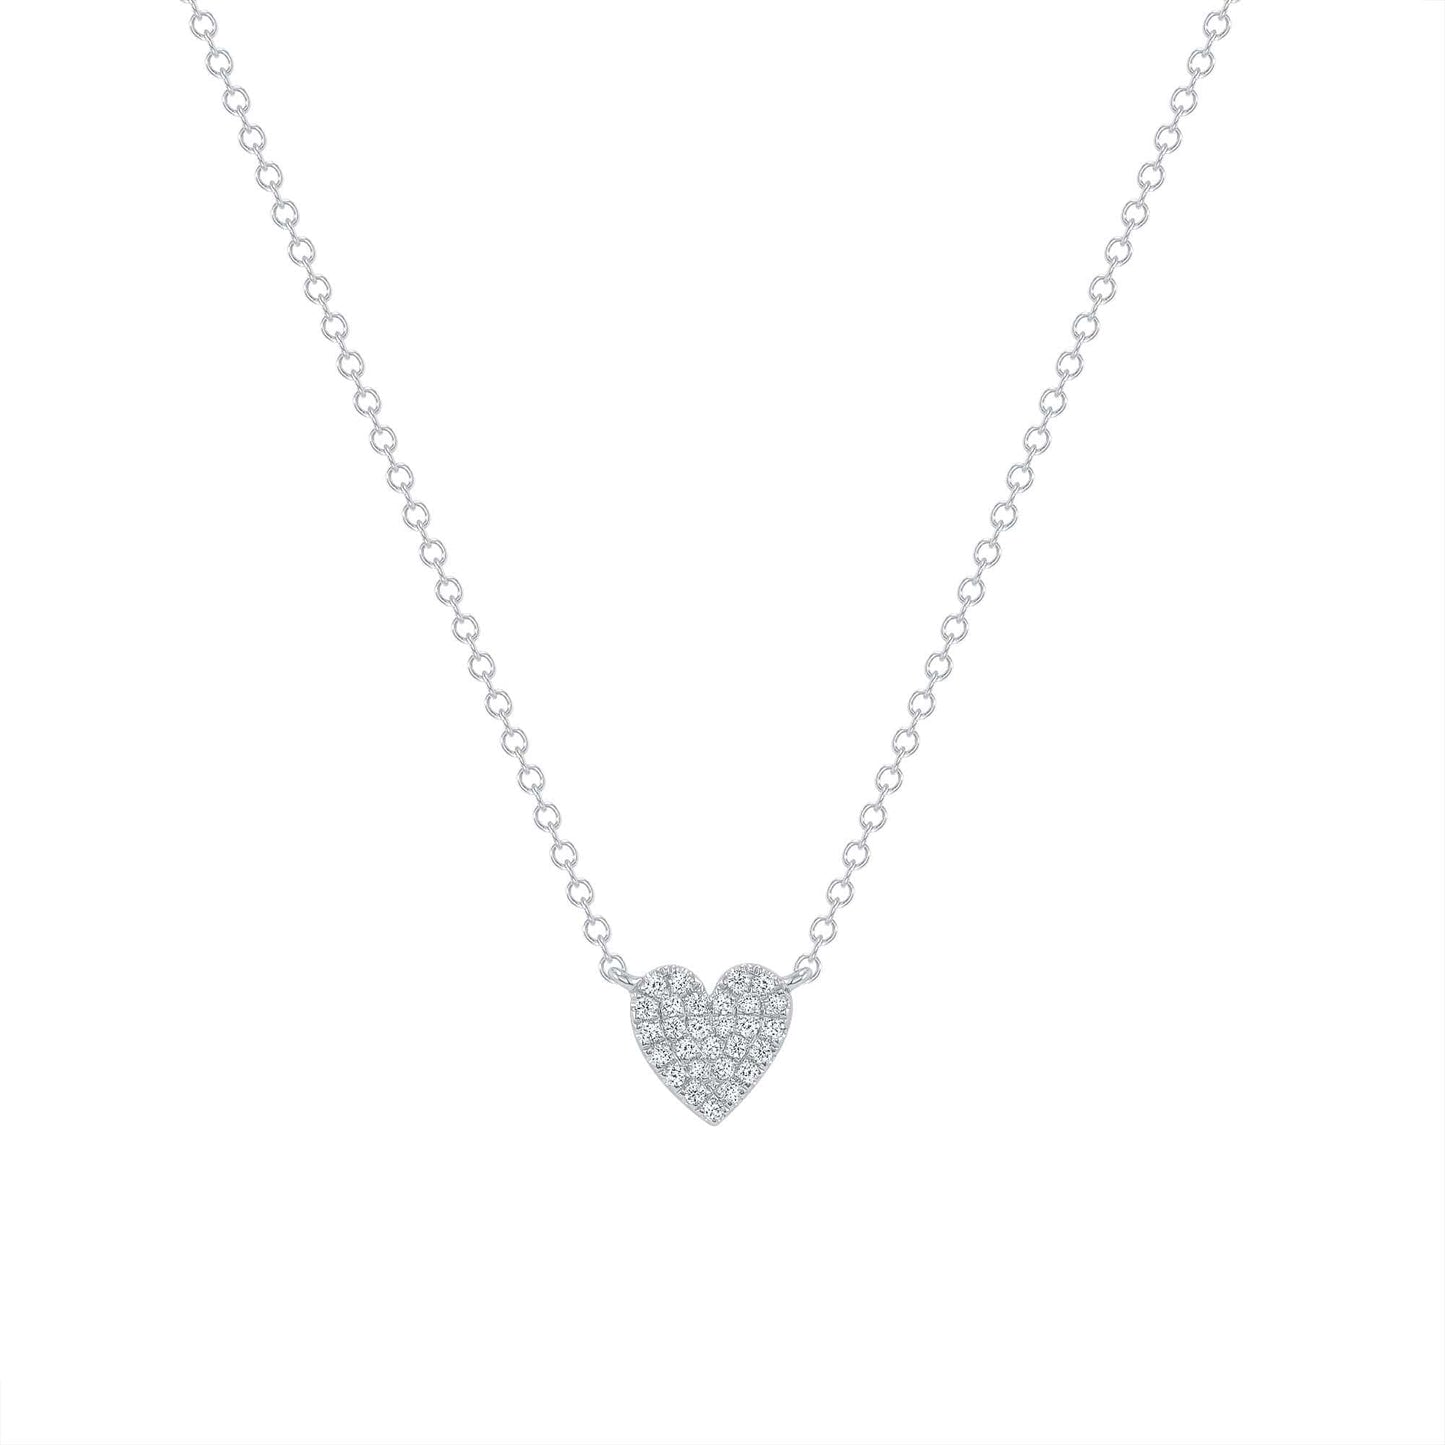 Modern Diamond Small Heart Necklace | BE LOVED Jewelry